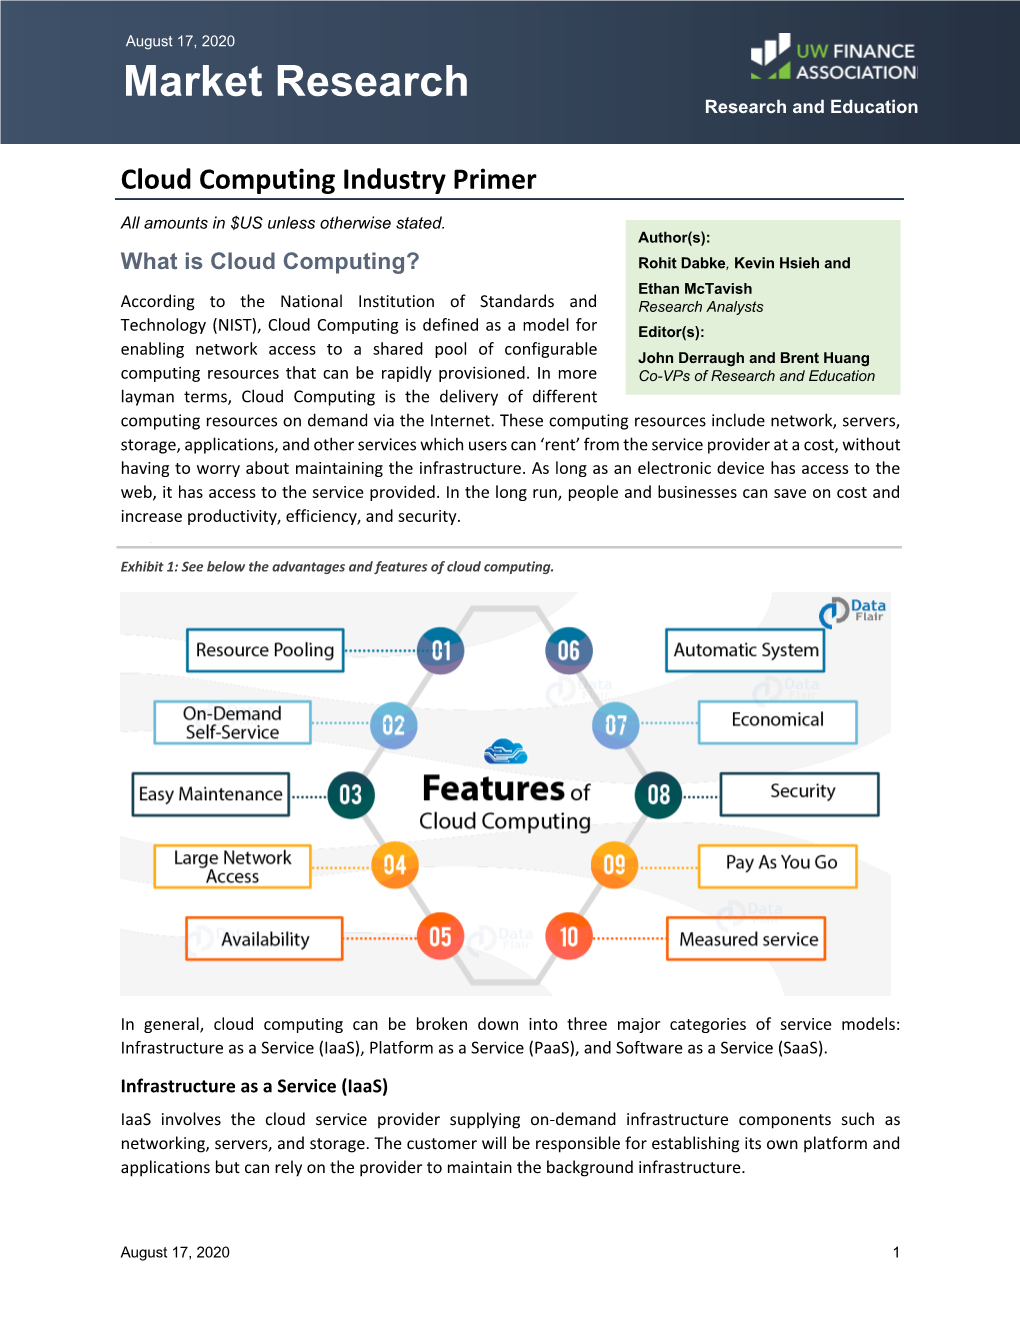 Cloud Computing Industry Primer Market Research Research and Education